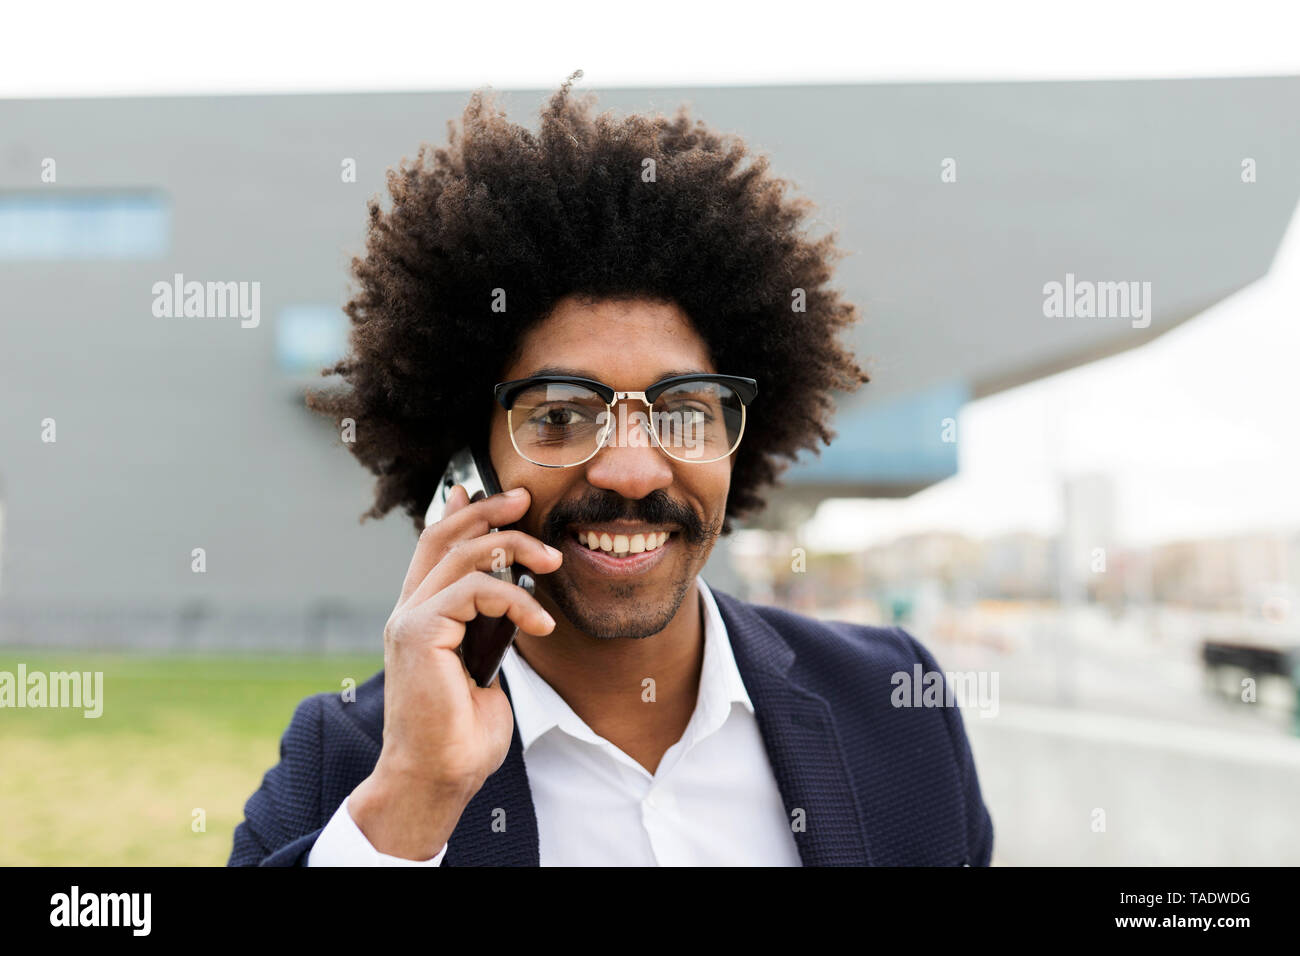 Spain, Barcelona, portrait of smiling businessman on cell phone in the city Stock Photo